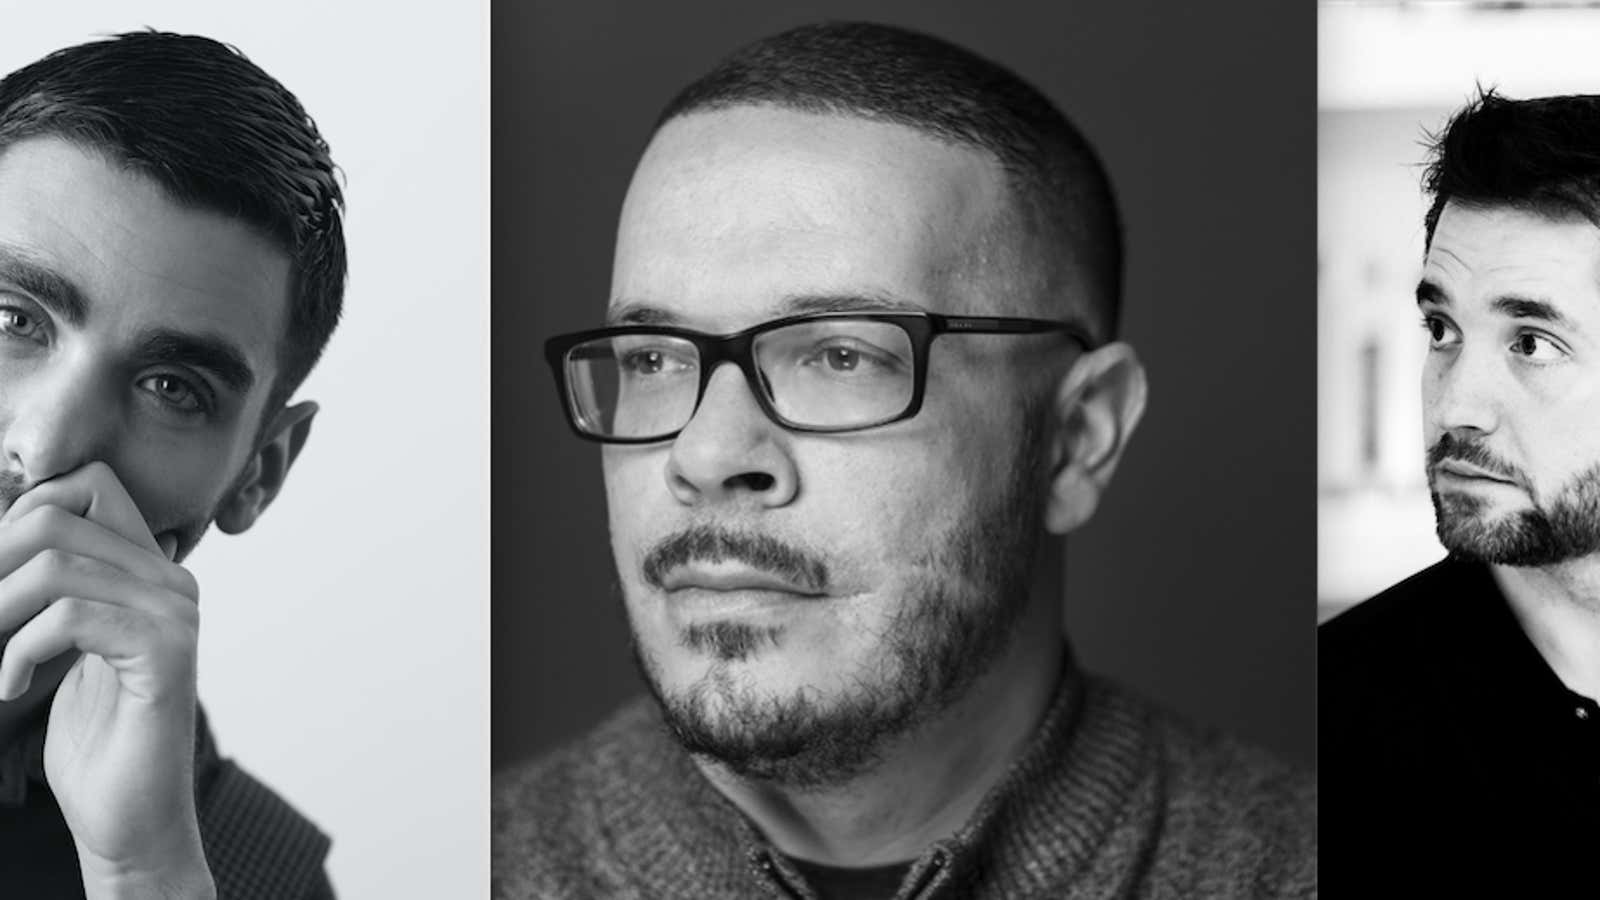 Left to right: Phillip Picardi (photo by Blacombe), Shaun King, and Alexis Ohanian